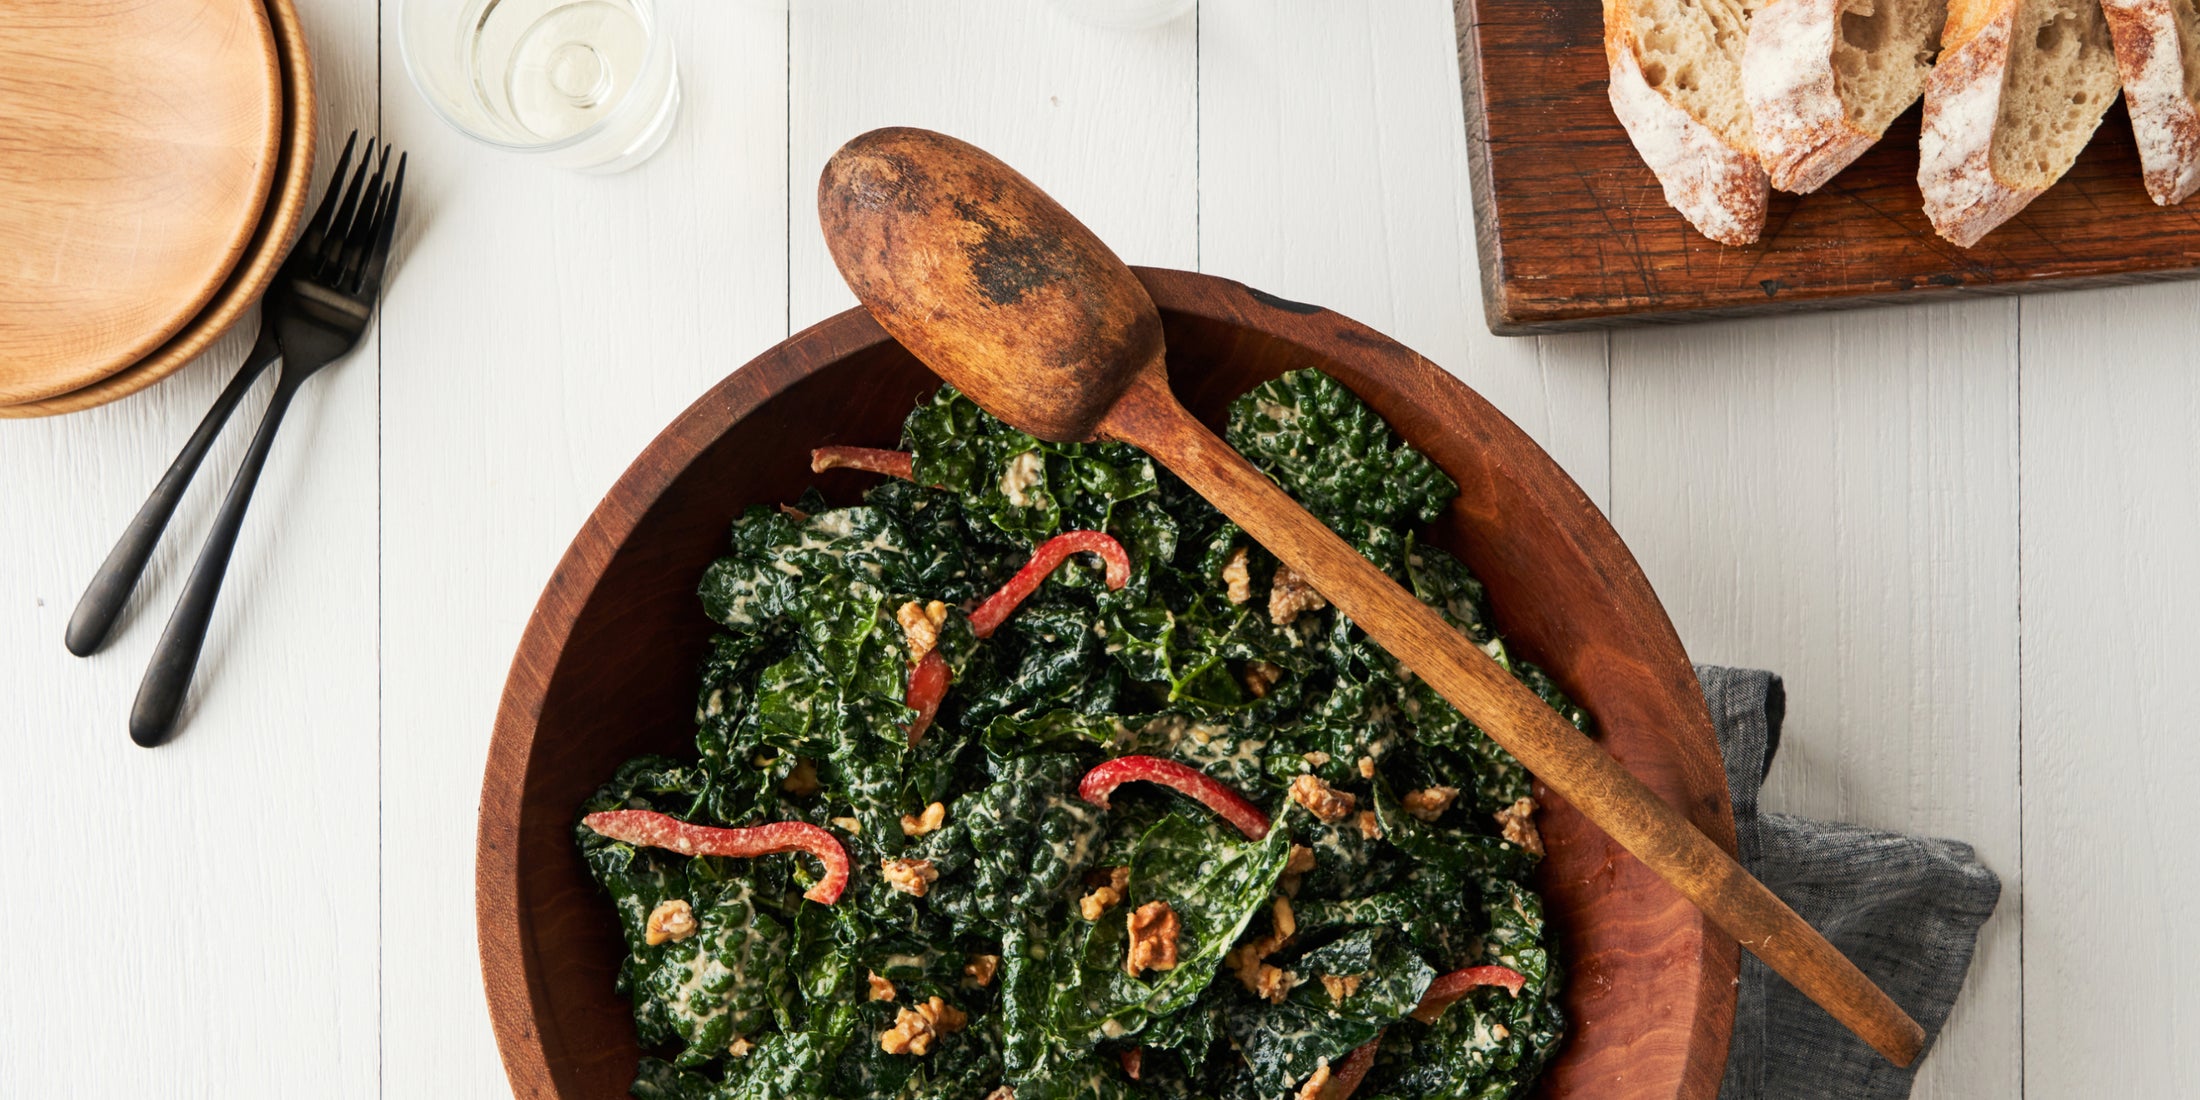 A large wooden serving bowl of kale salad with wooden serving spoon